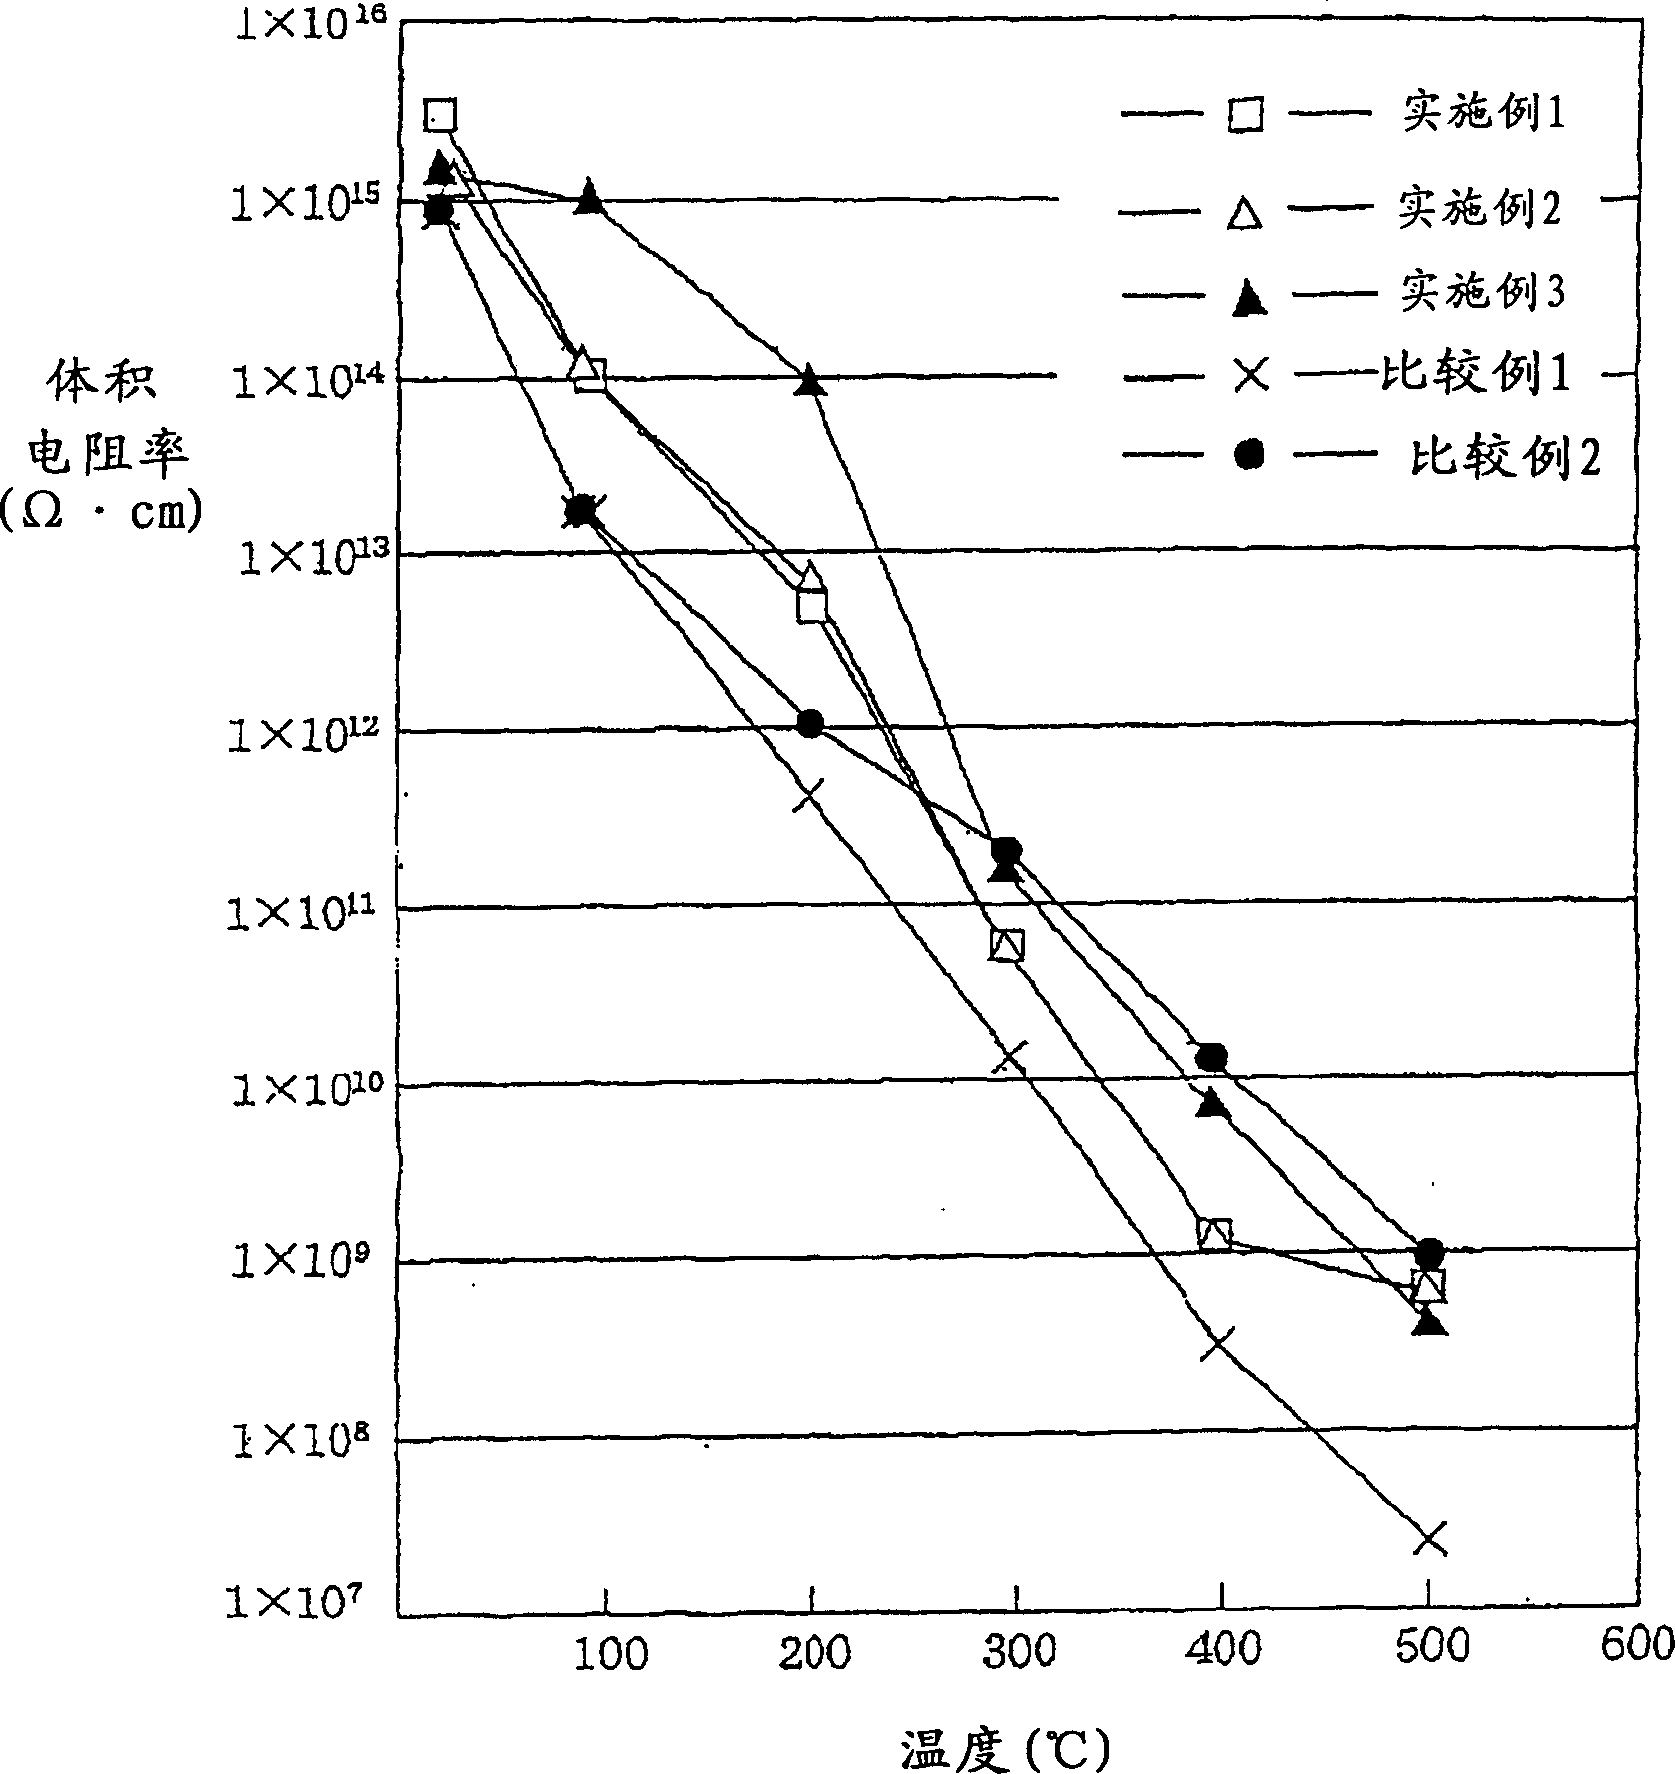 Carbon-containing alumium nitride sintered compact, and ceramic substrate for use in apparatus for manufacturing and inspecting semiconductor